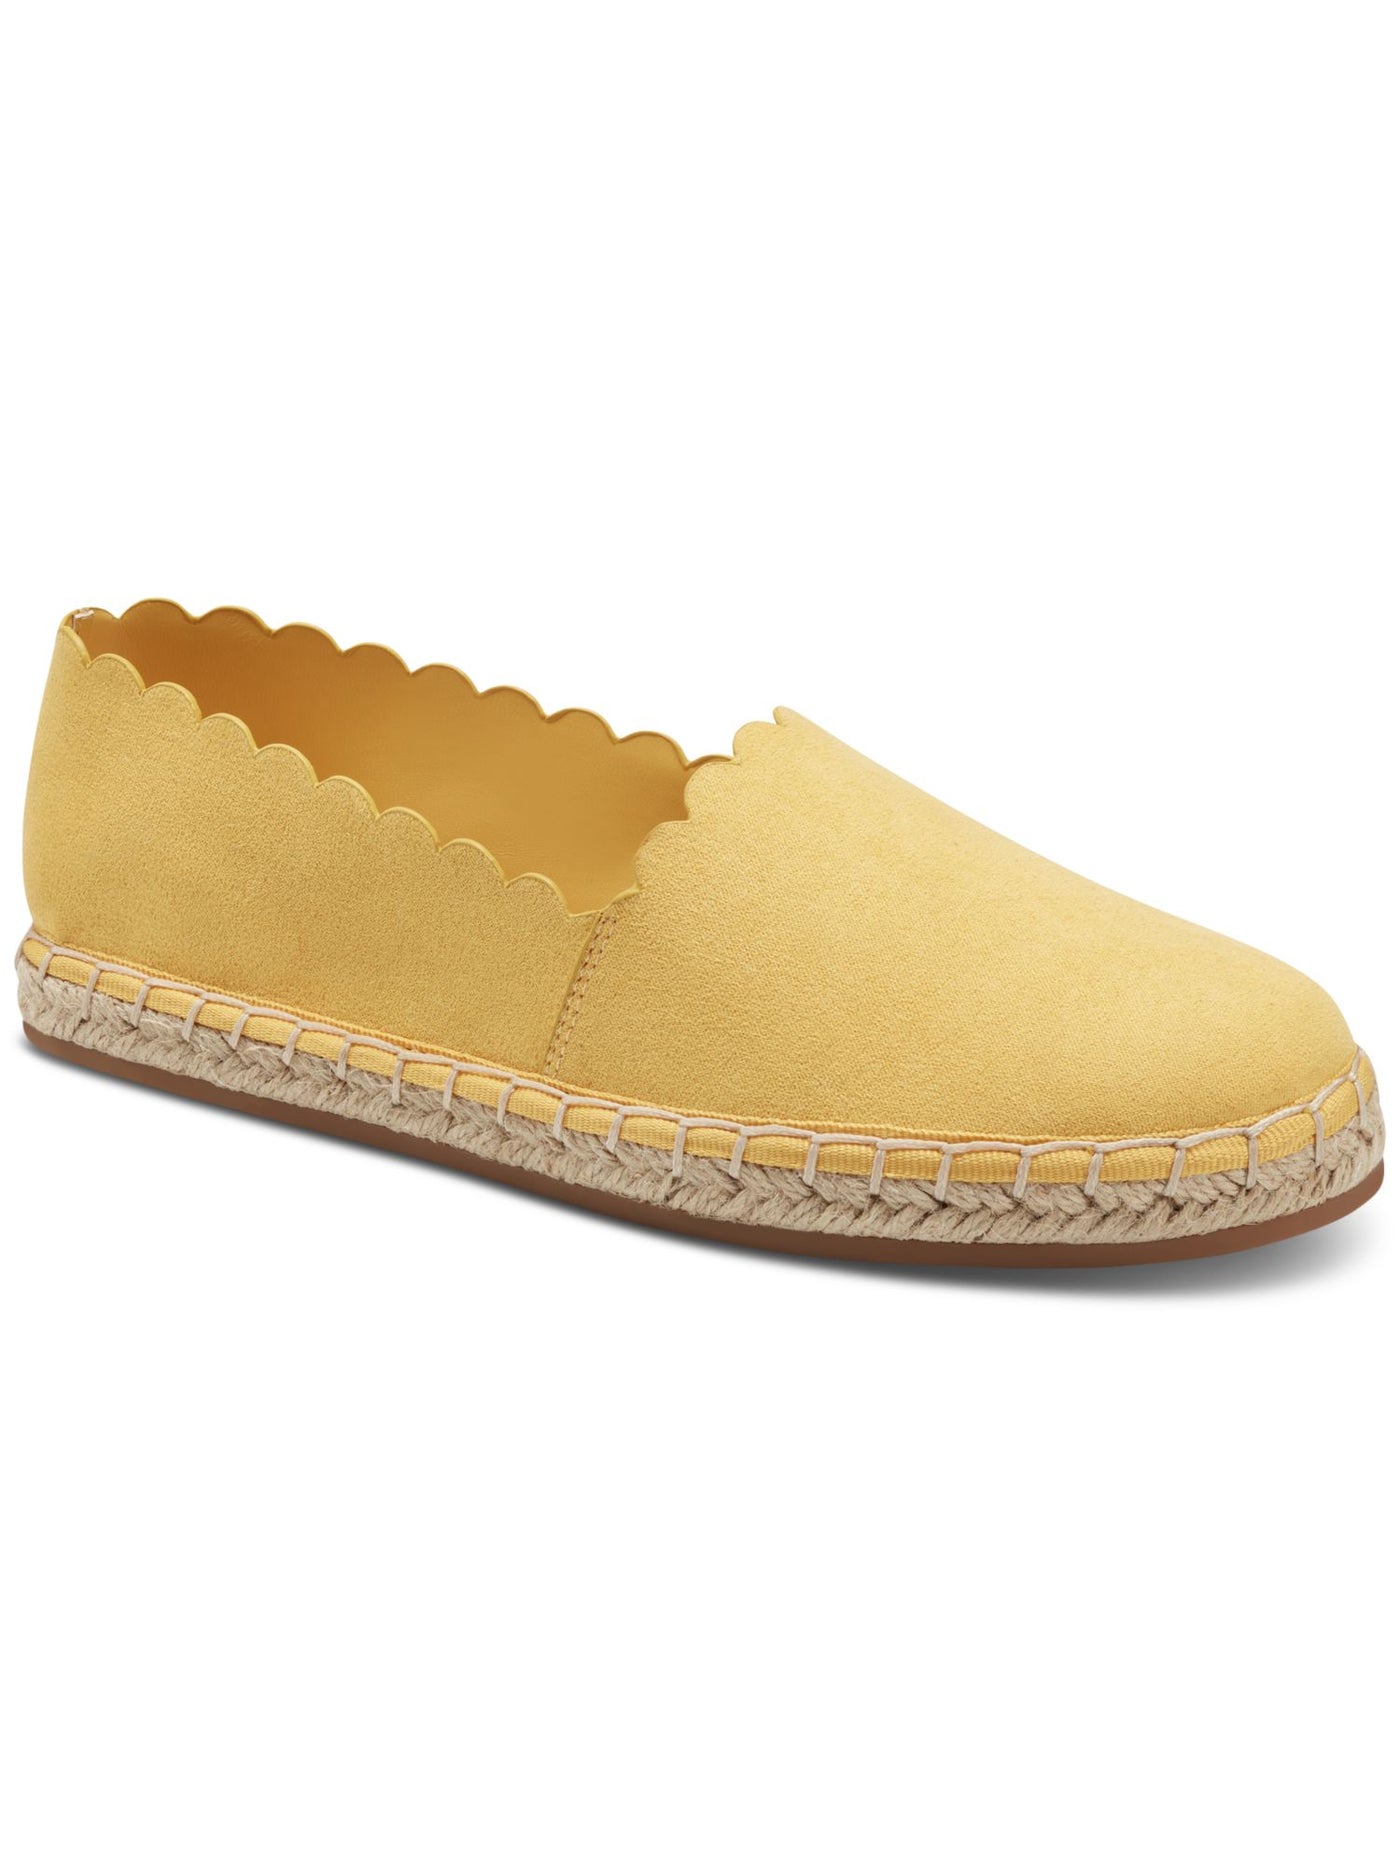 CHARTER CLUB Womens Yellow Padded Scalloped Goring Joliee Round Toe Slip On Espadrille Shoes 7 M